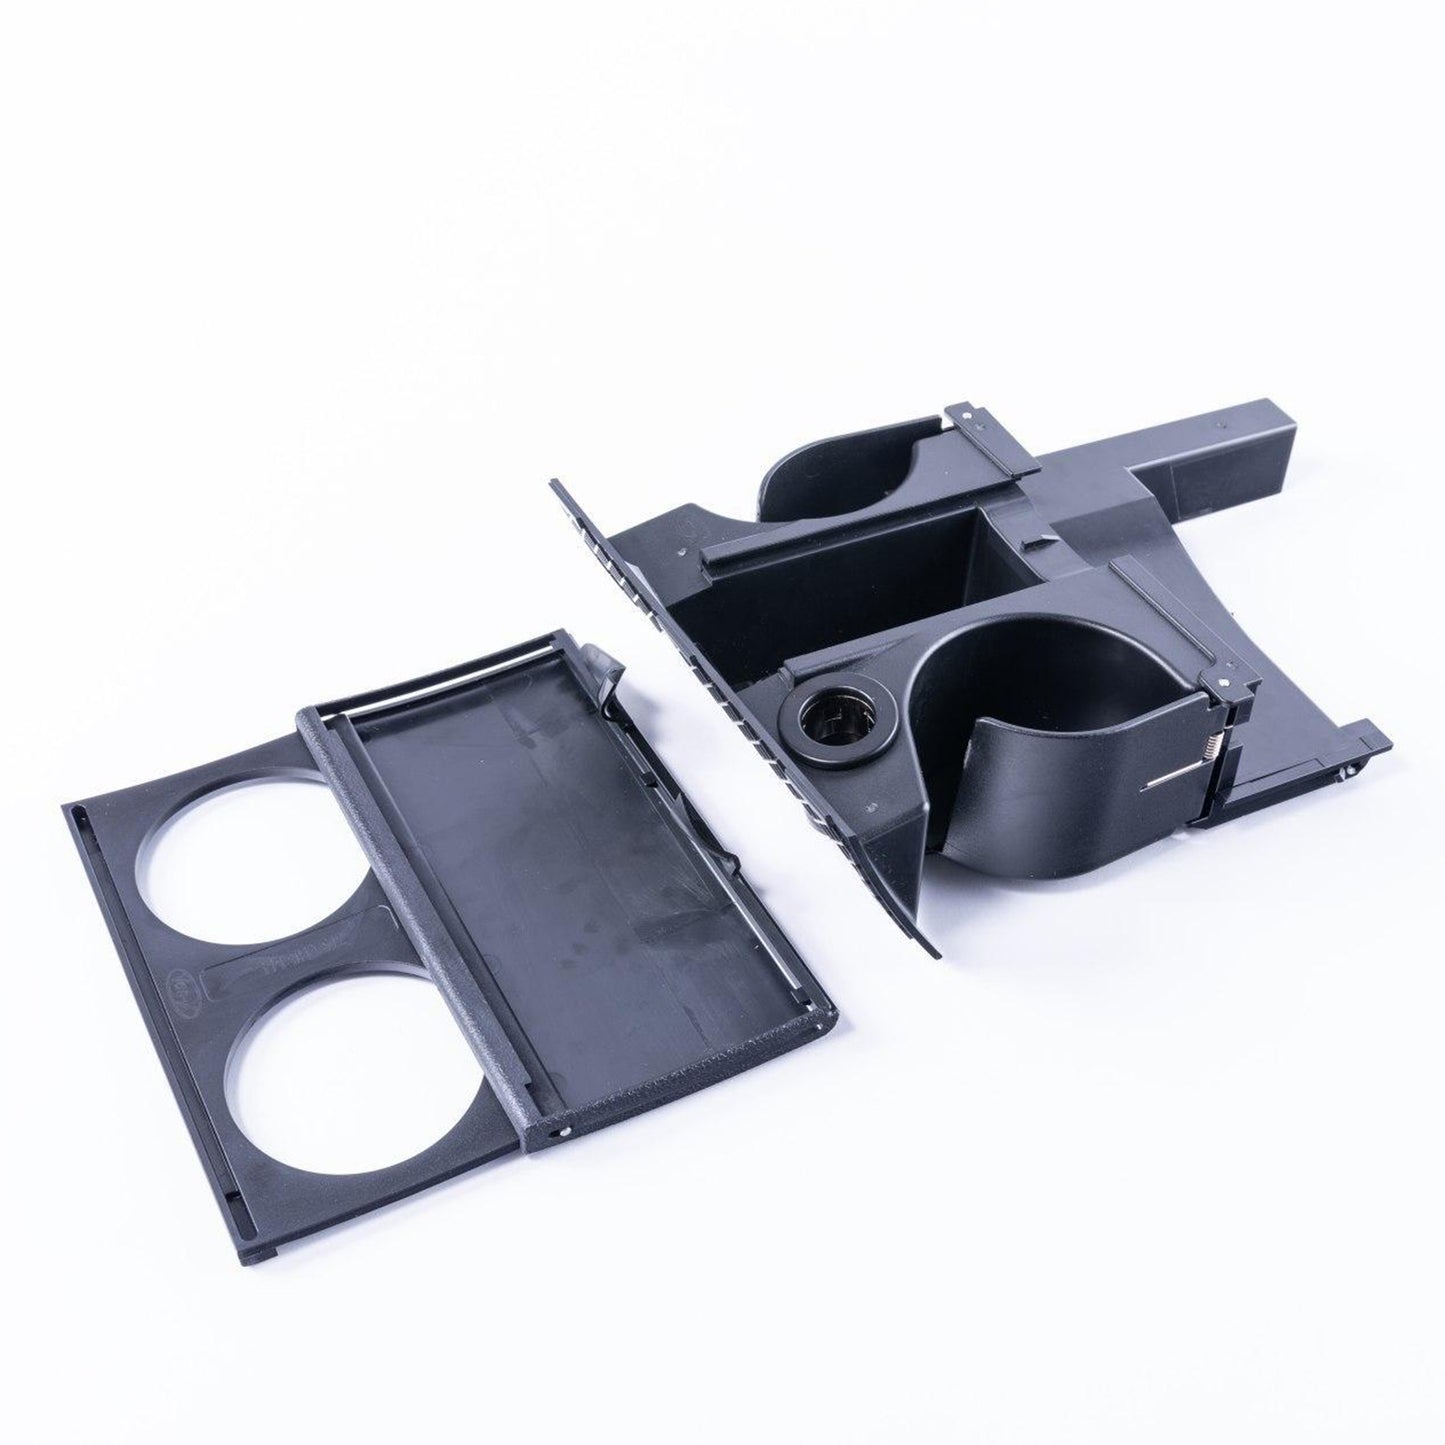 VW T5 Transporter Campervan Cup Holder and 2 Extra Cups on Extension Replacement